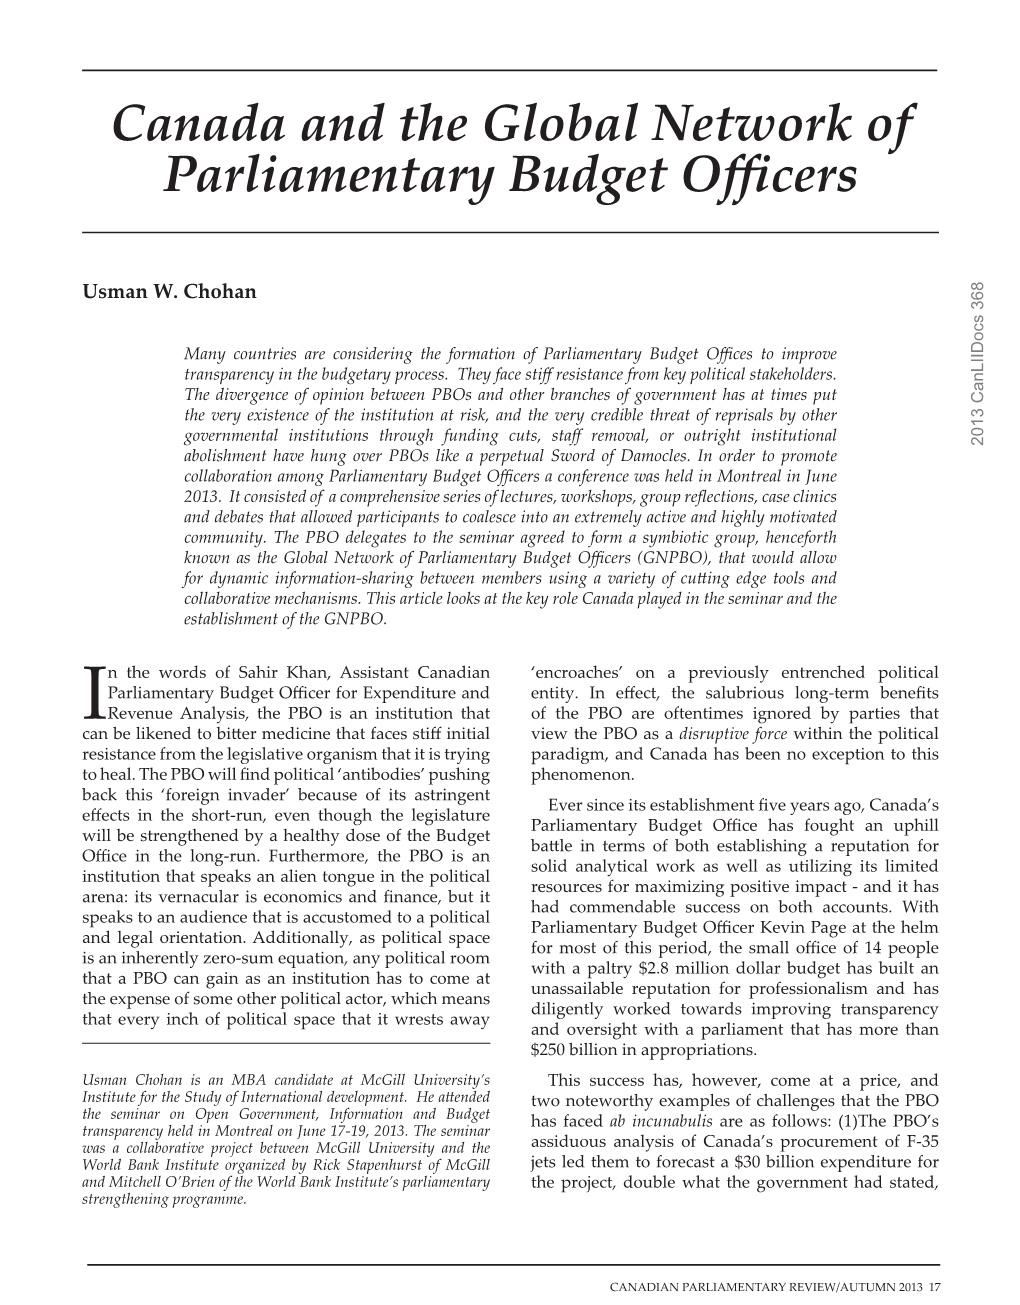 Canada and the Global Network of Parliamentary Budget Officers